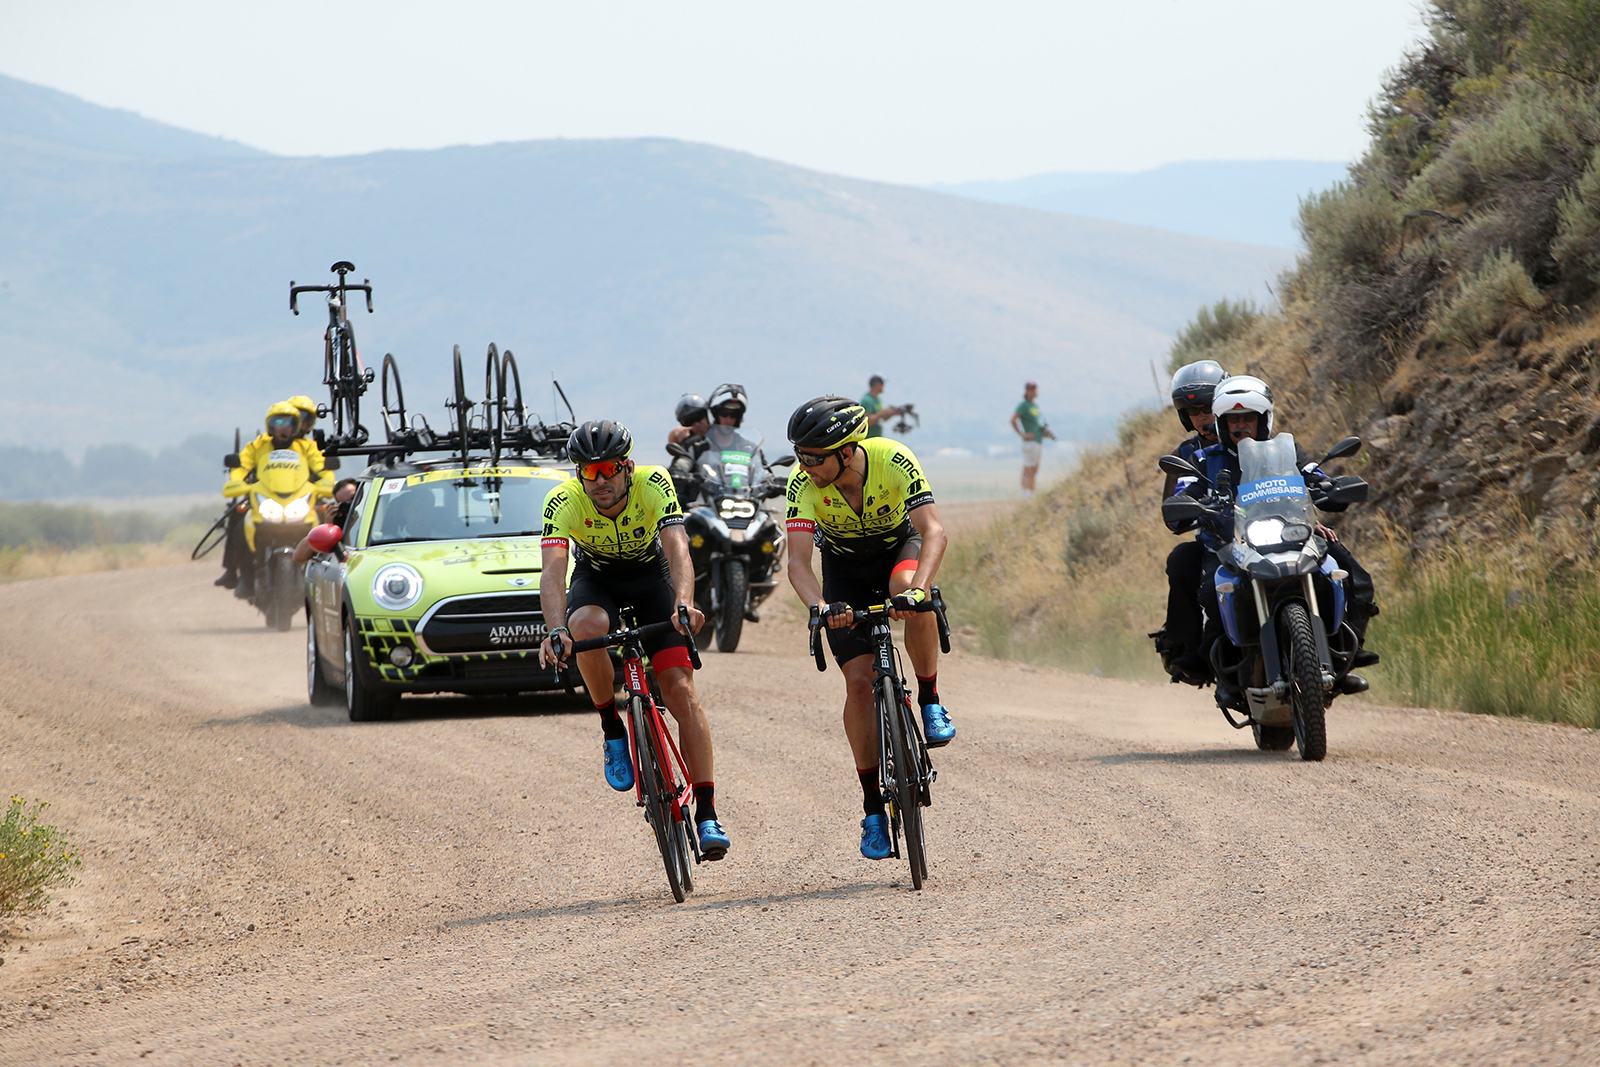 The Holowesko/Citadle riders chase the break through Democrat Alley. Stage 5 of the 2018 Tour of Utah, August 10, 2018. Photo by Cathy Fegan-Kim, www.cottonsoxphotography.net